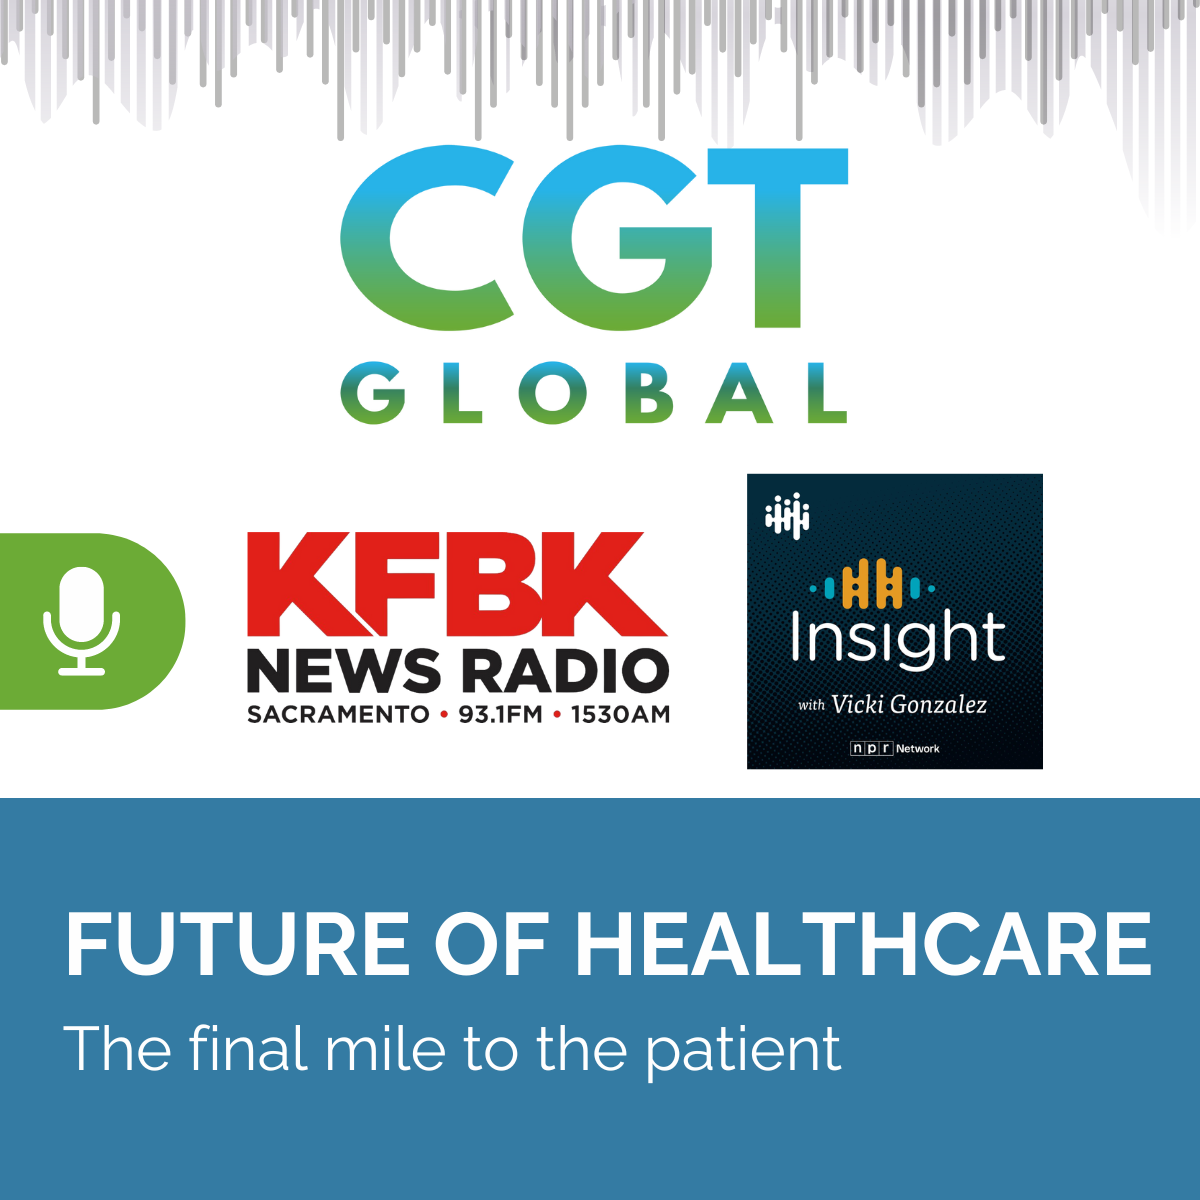 CGT Global the future of healthcare - Final mile to the patient